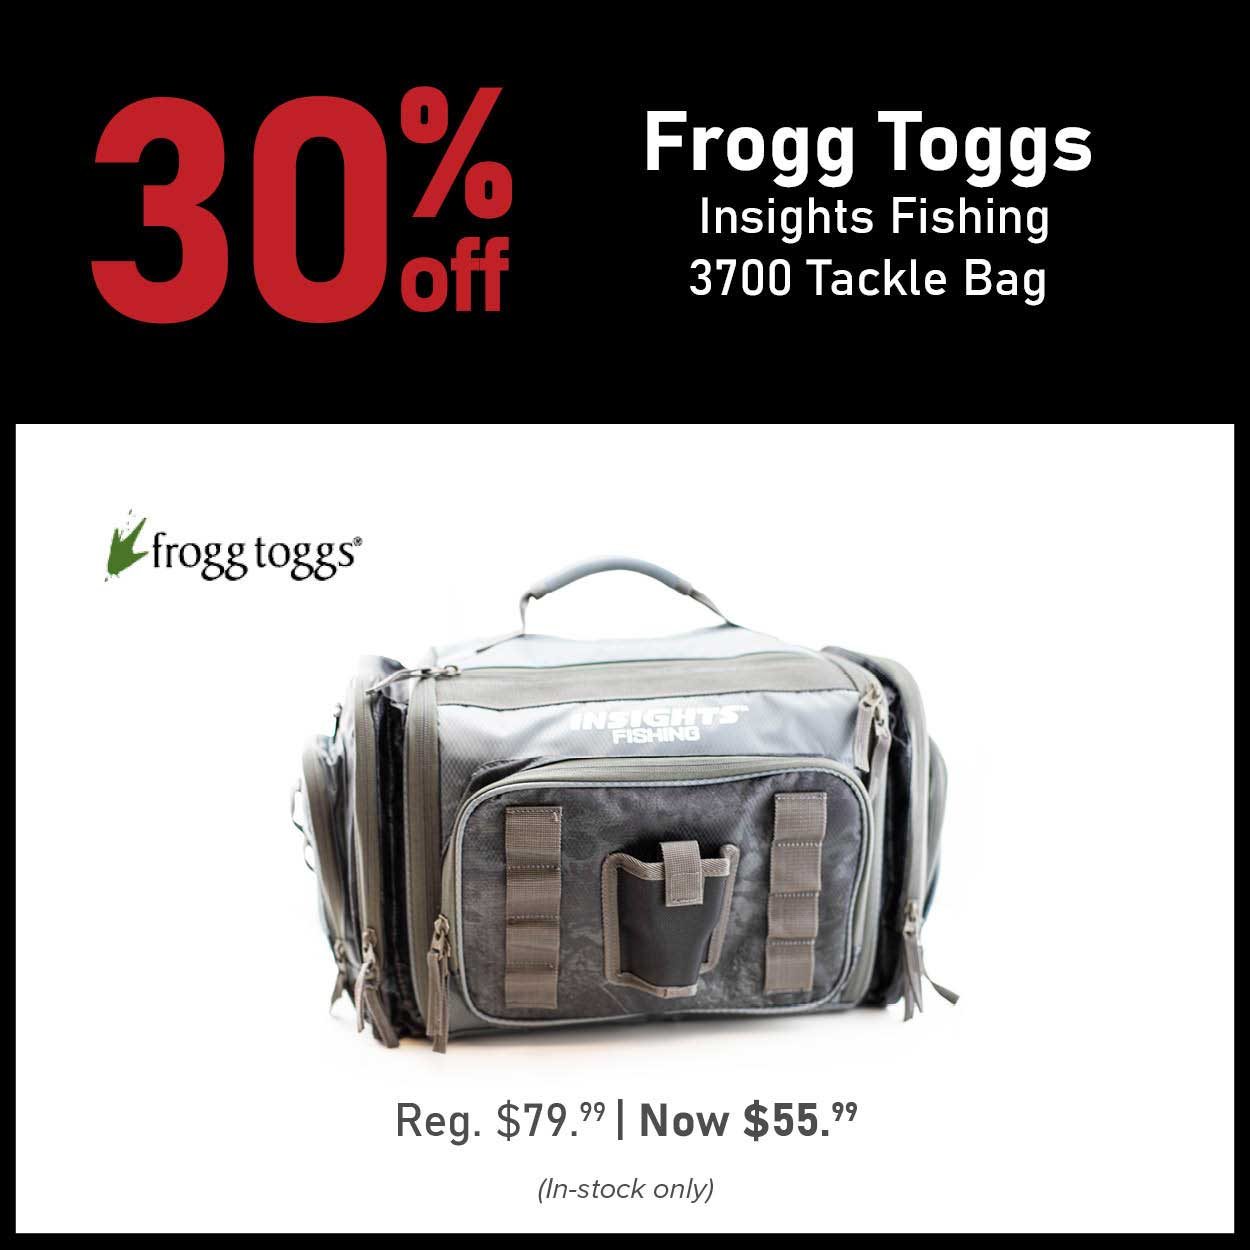 30% Off Frogg Toggs Insights Fishing 3700 Tackle Bag Reg. $79.99 | Now $55.99 (In-stock only)